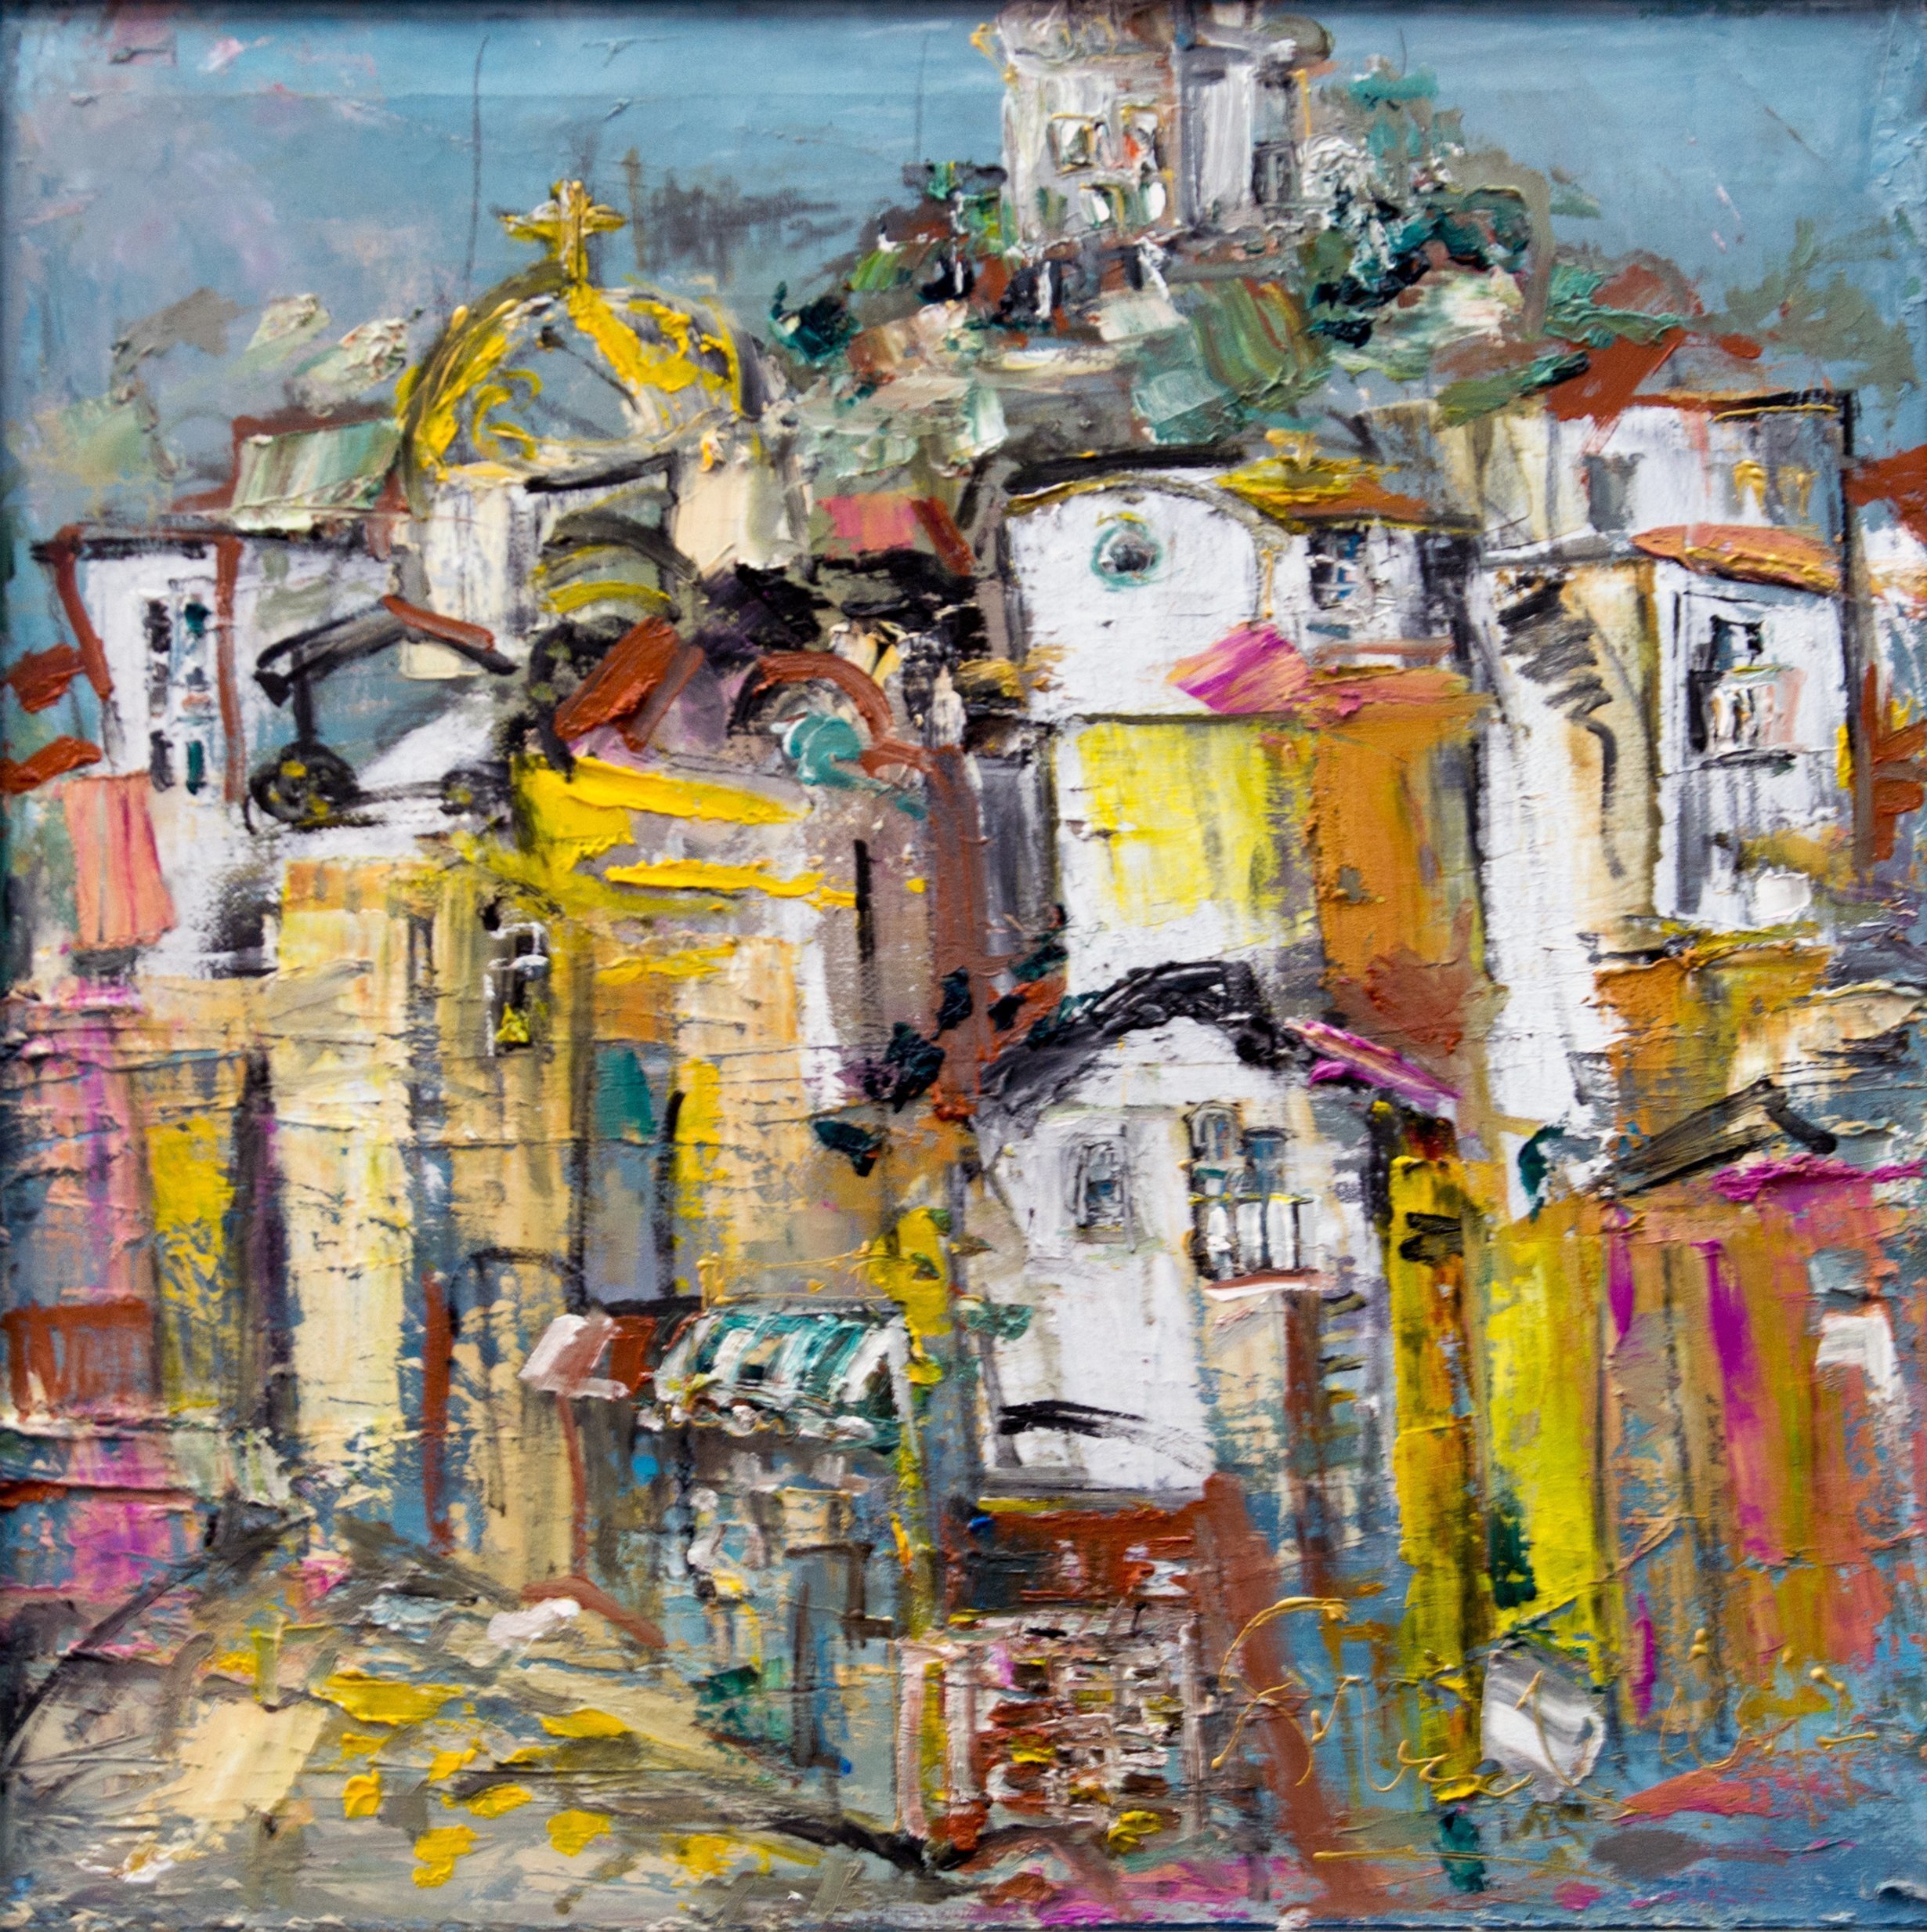 Svetla Andonova; Plovdiv 32 2017, 2017, Original Painting Oil, 40 x 40 cm. Artwork description: 241 Category	Oil paintingSubject	Landscapes, sea and skySubstrate	CanvasMaterials	Oil colors on canvasStyle	ImpressionisticDimensions	47 x 47 x 6 cm  framed    40 x 40 x 4 cm  unframed    40 x 40 cm  actual image size Framing	This artwork is sold framed...